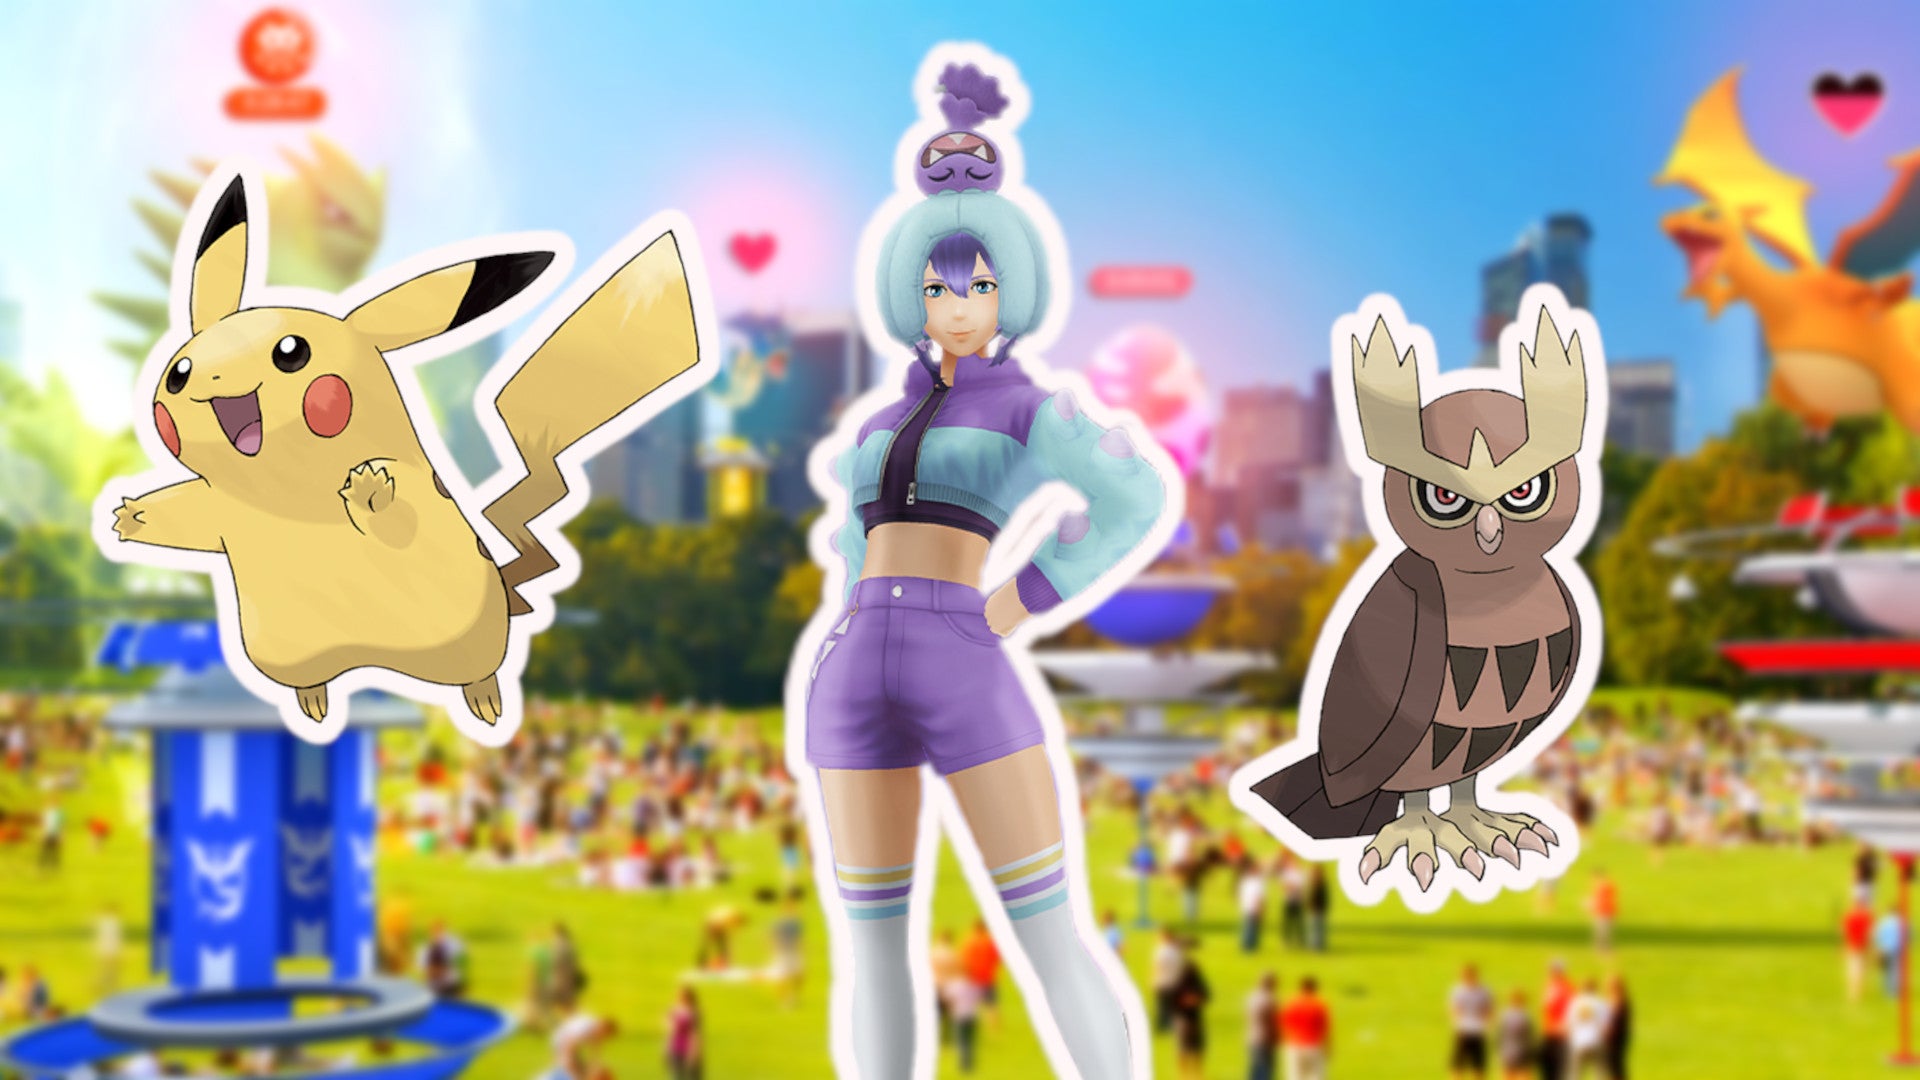 Pokémon Go: New Year’s Event 2023 – These Pokémon now appear more frequently